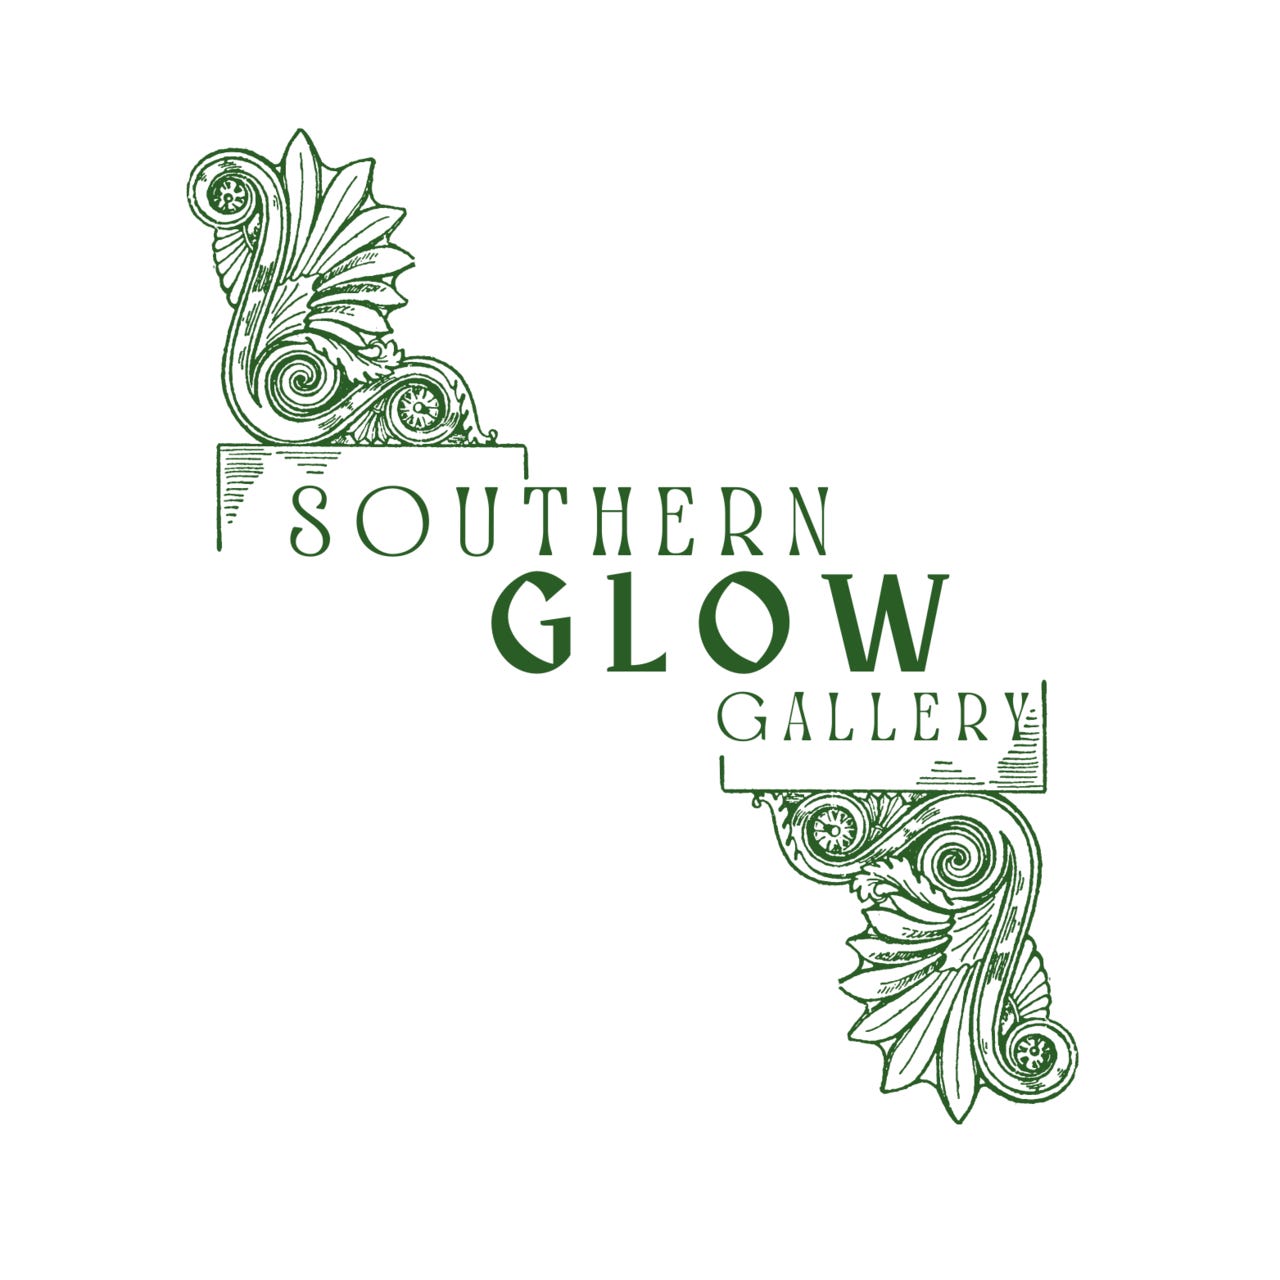 Southern Glow Gallery